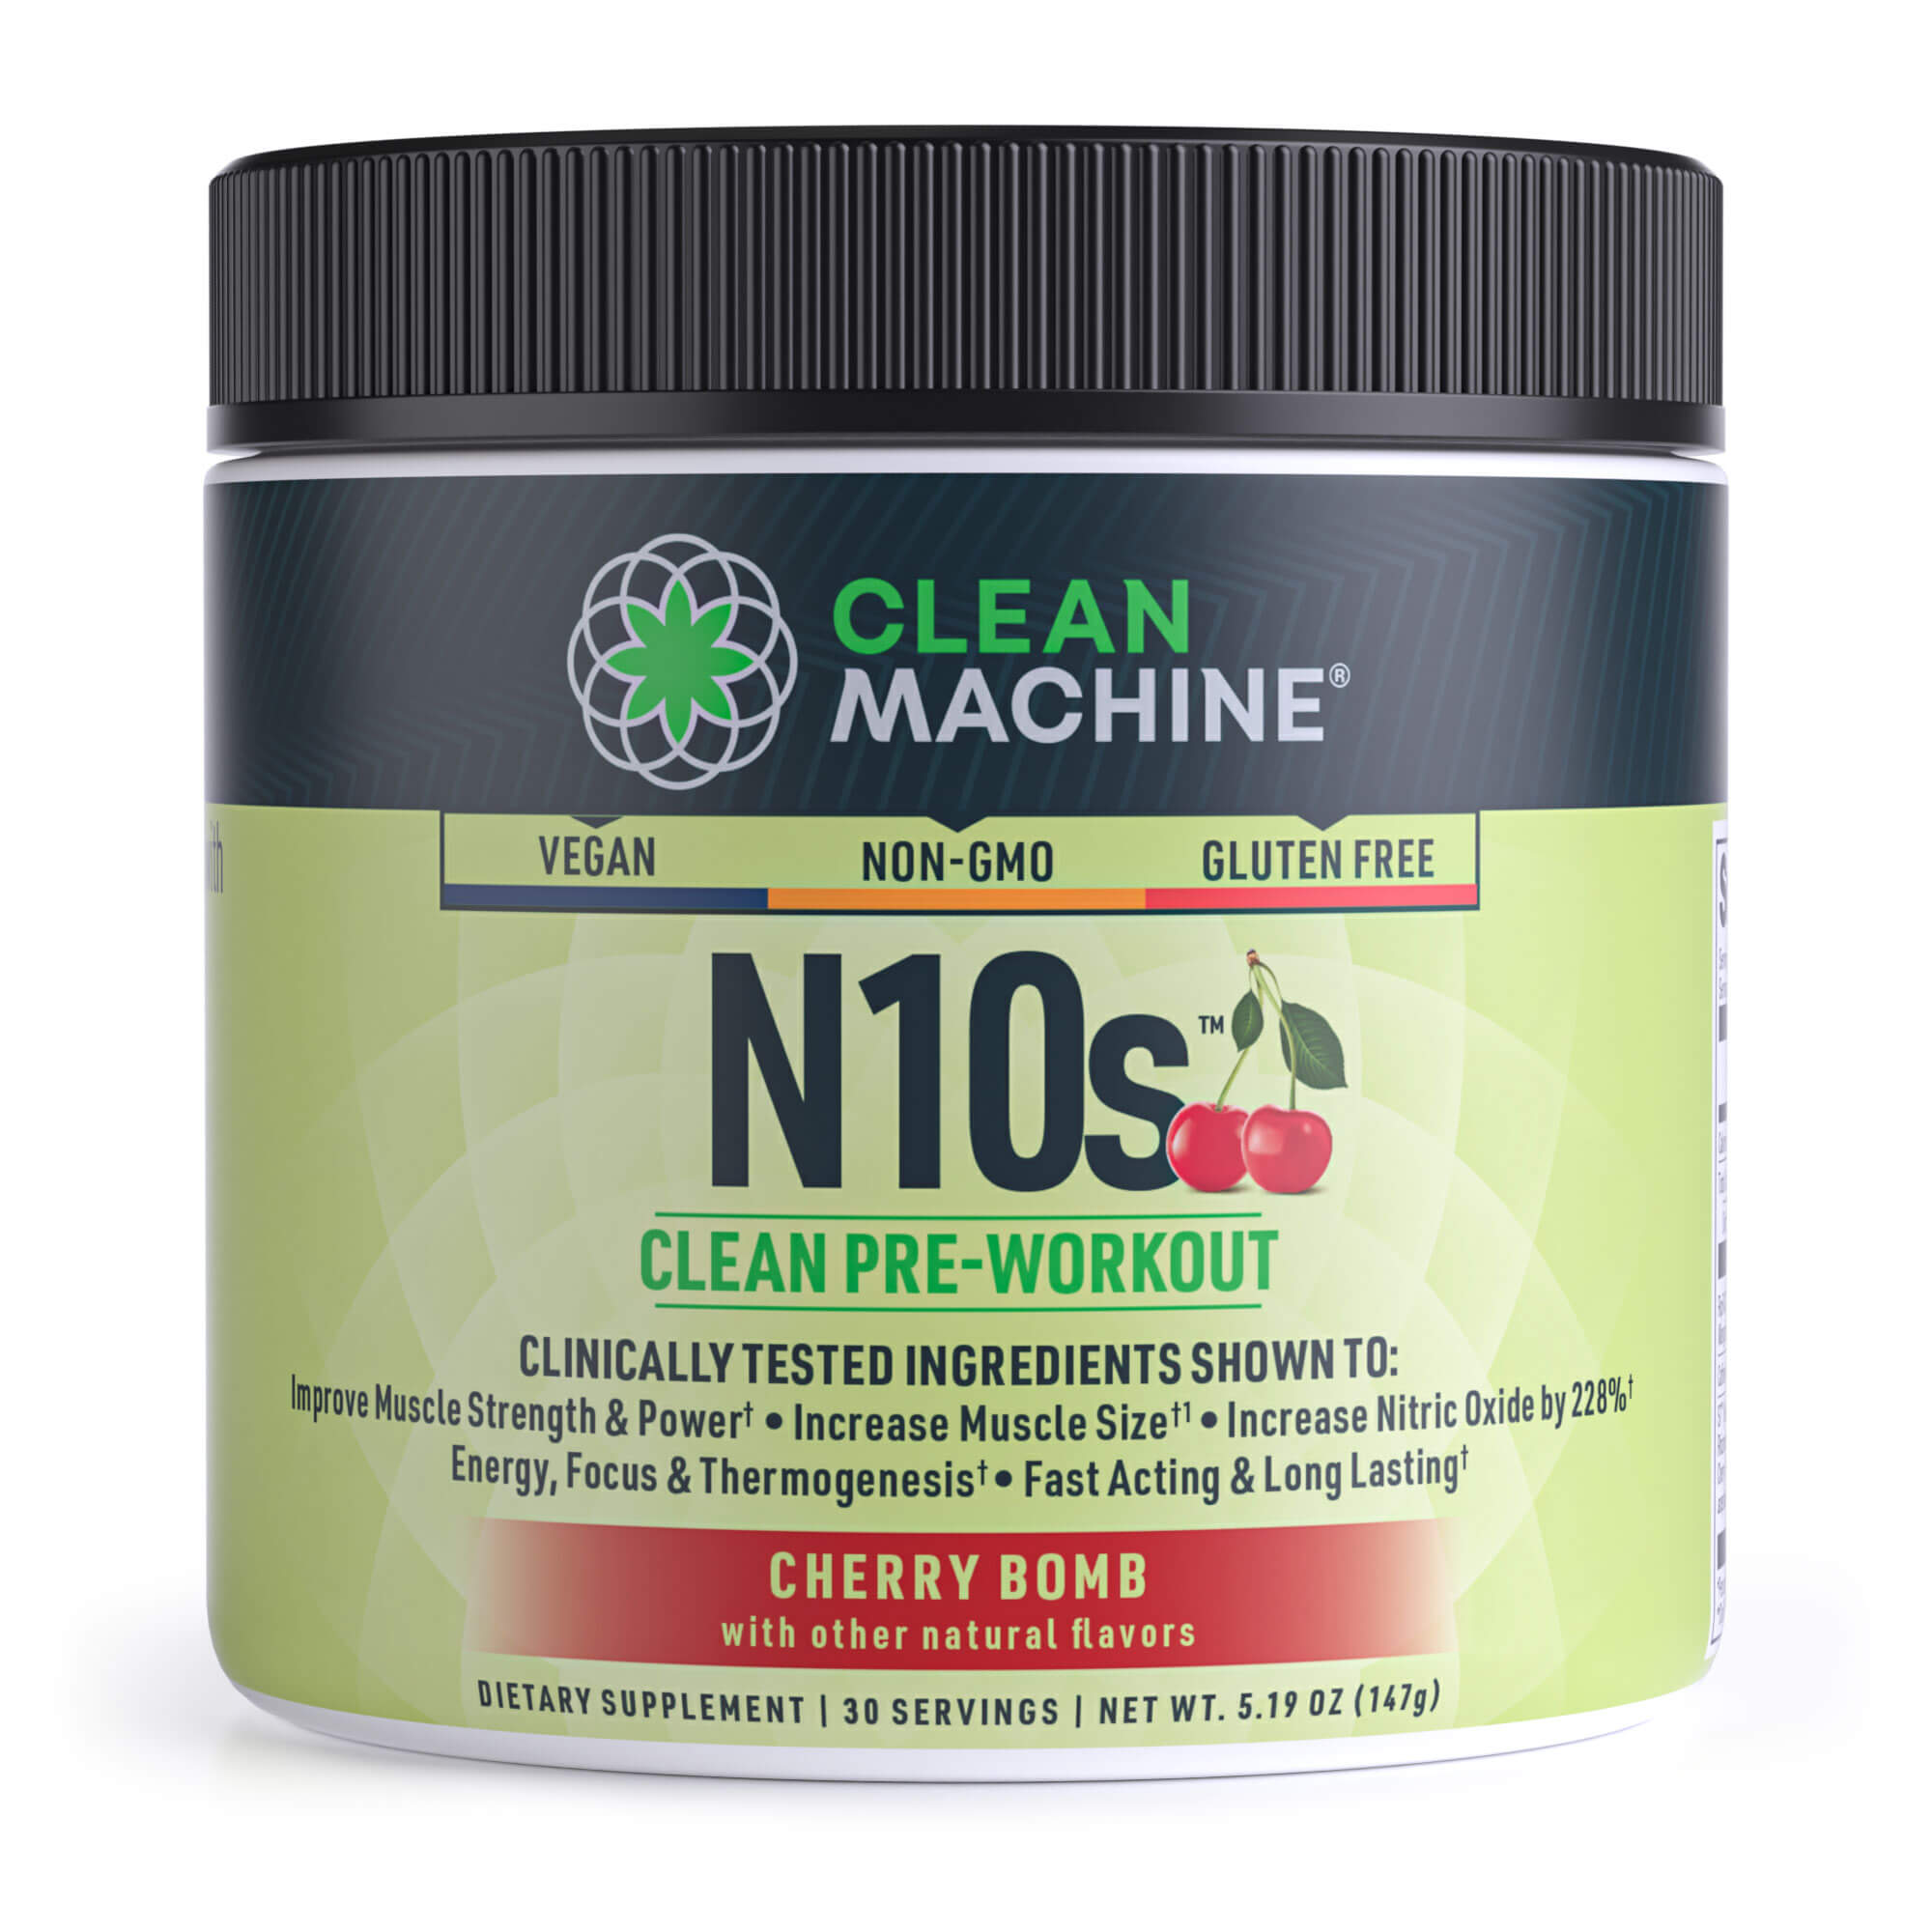 N10s Clean Pre-workout - JUST ARRIVED!